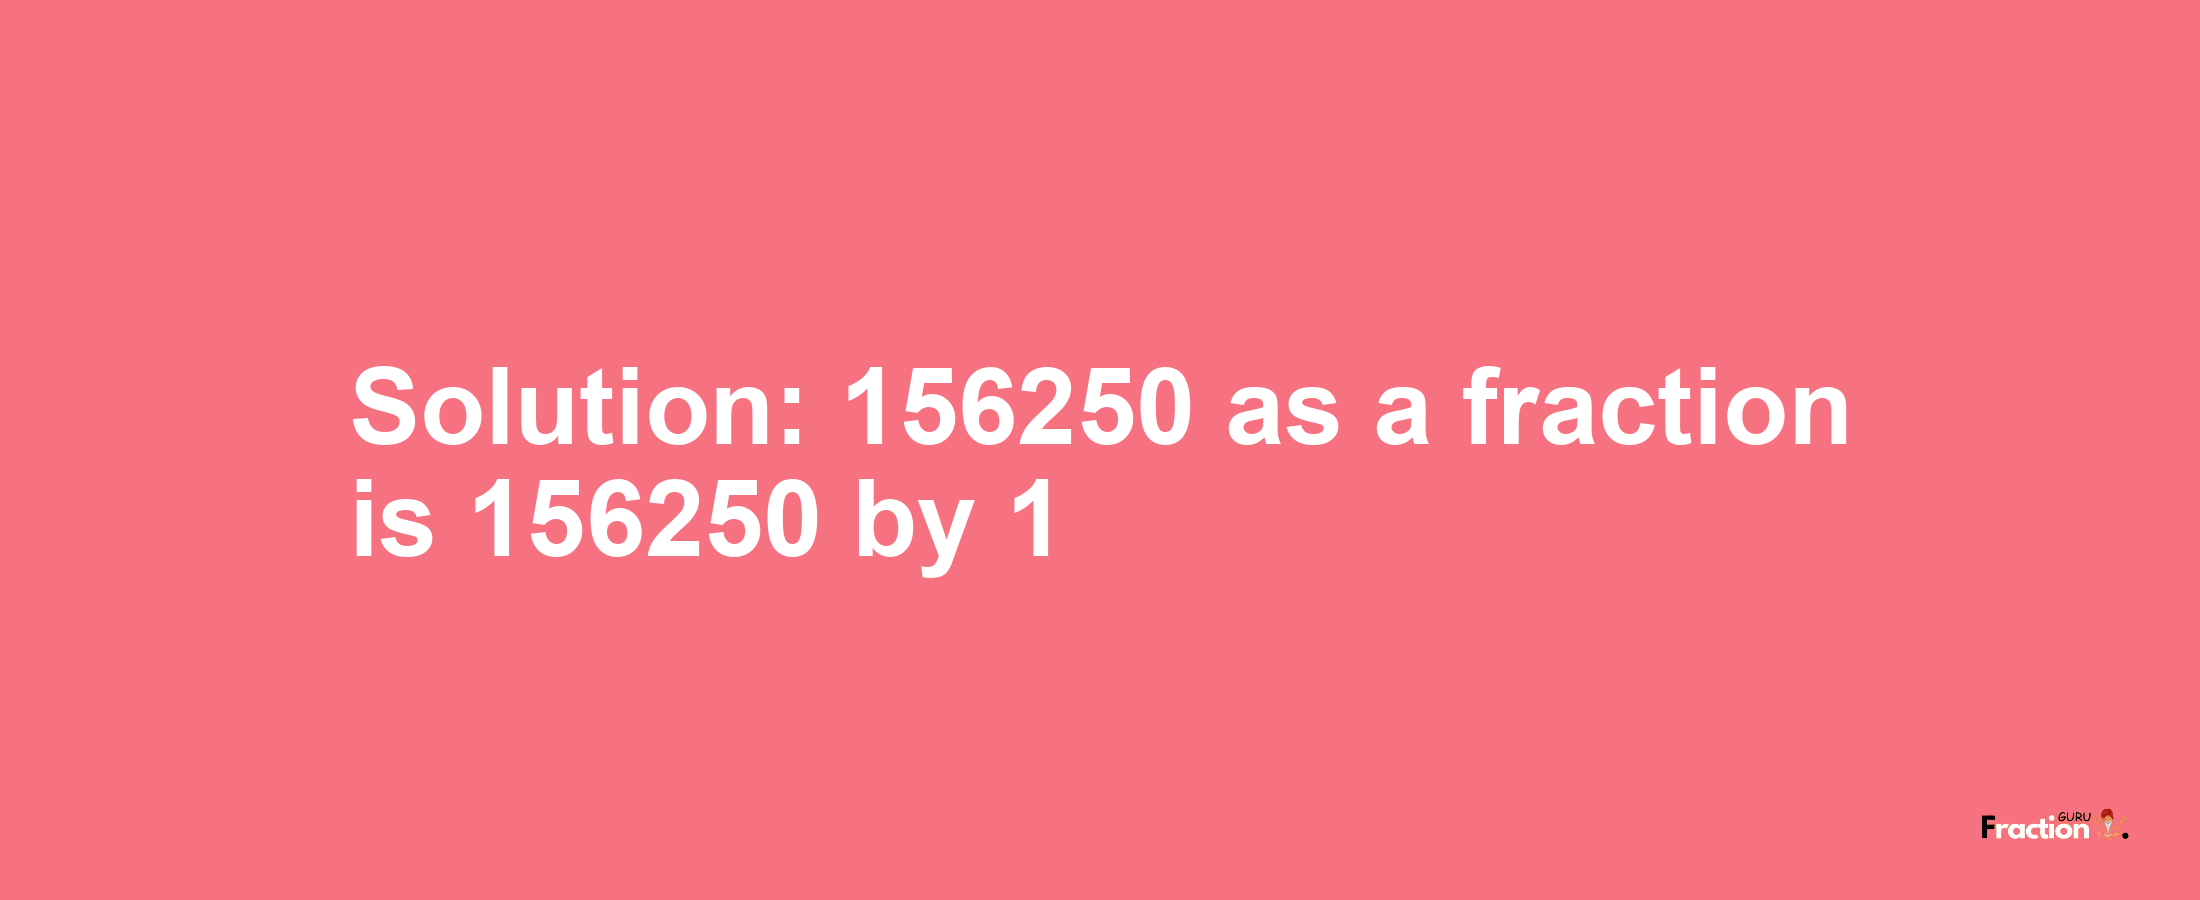 Solution:156250 as a fraction is 156250/1